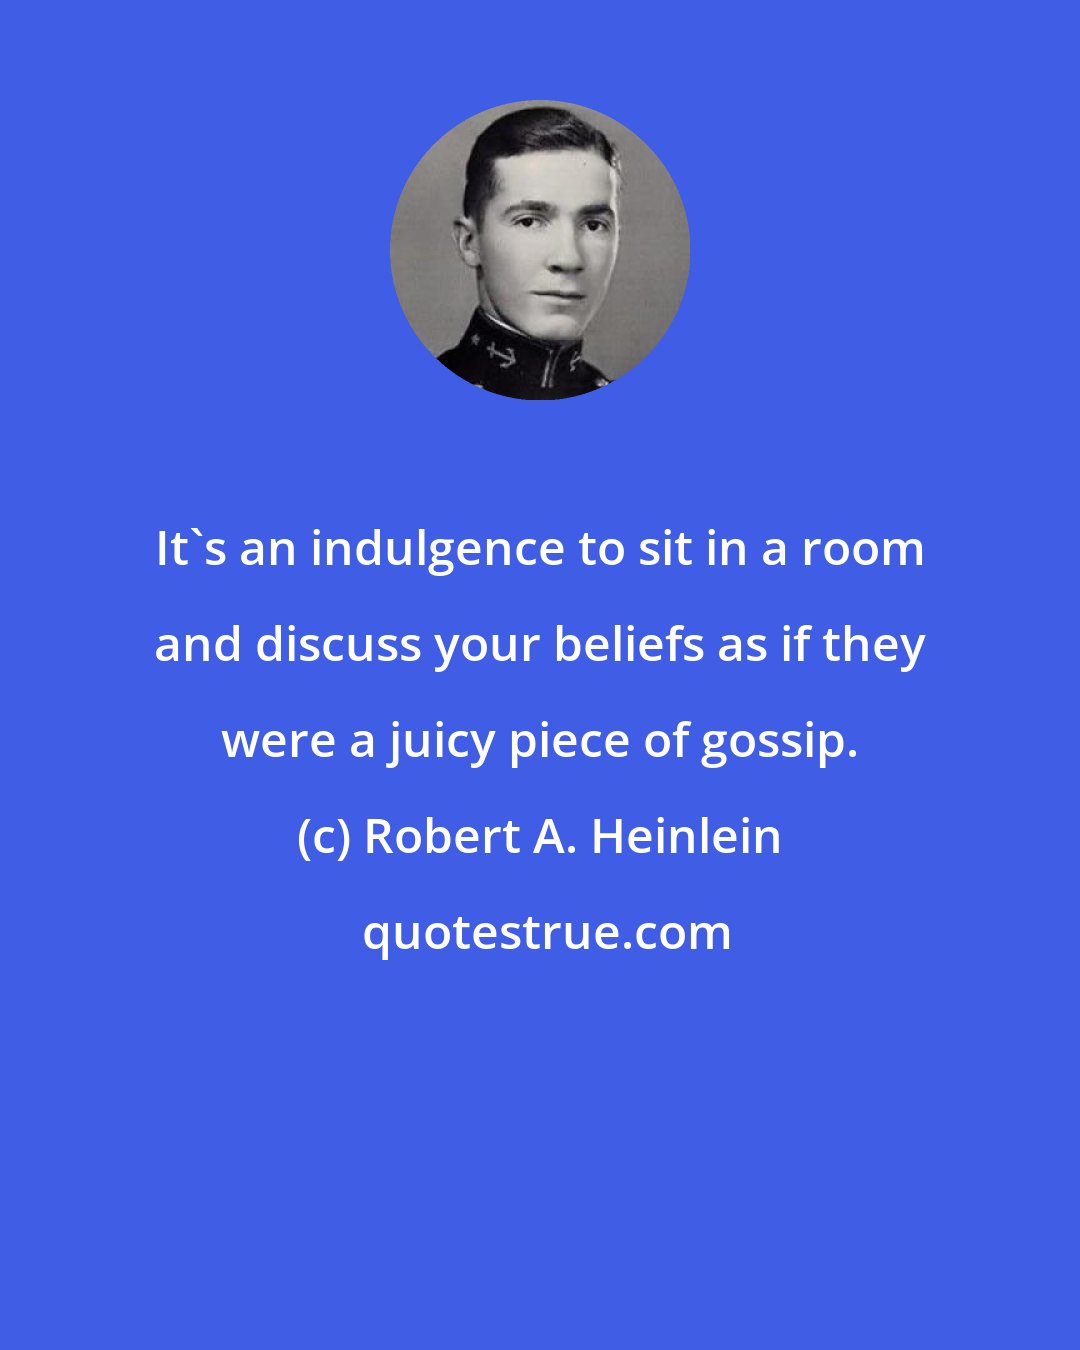 Robert A. Heinlein: It's an indulgence to sit in a room and discuss your beliefs as if they were a juicy piece of gossip.